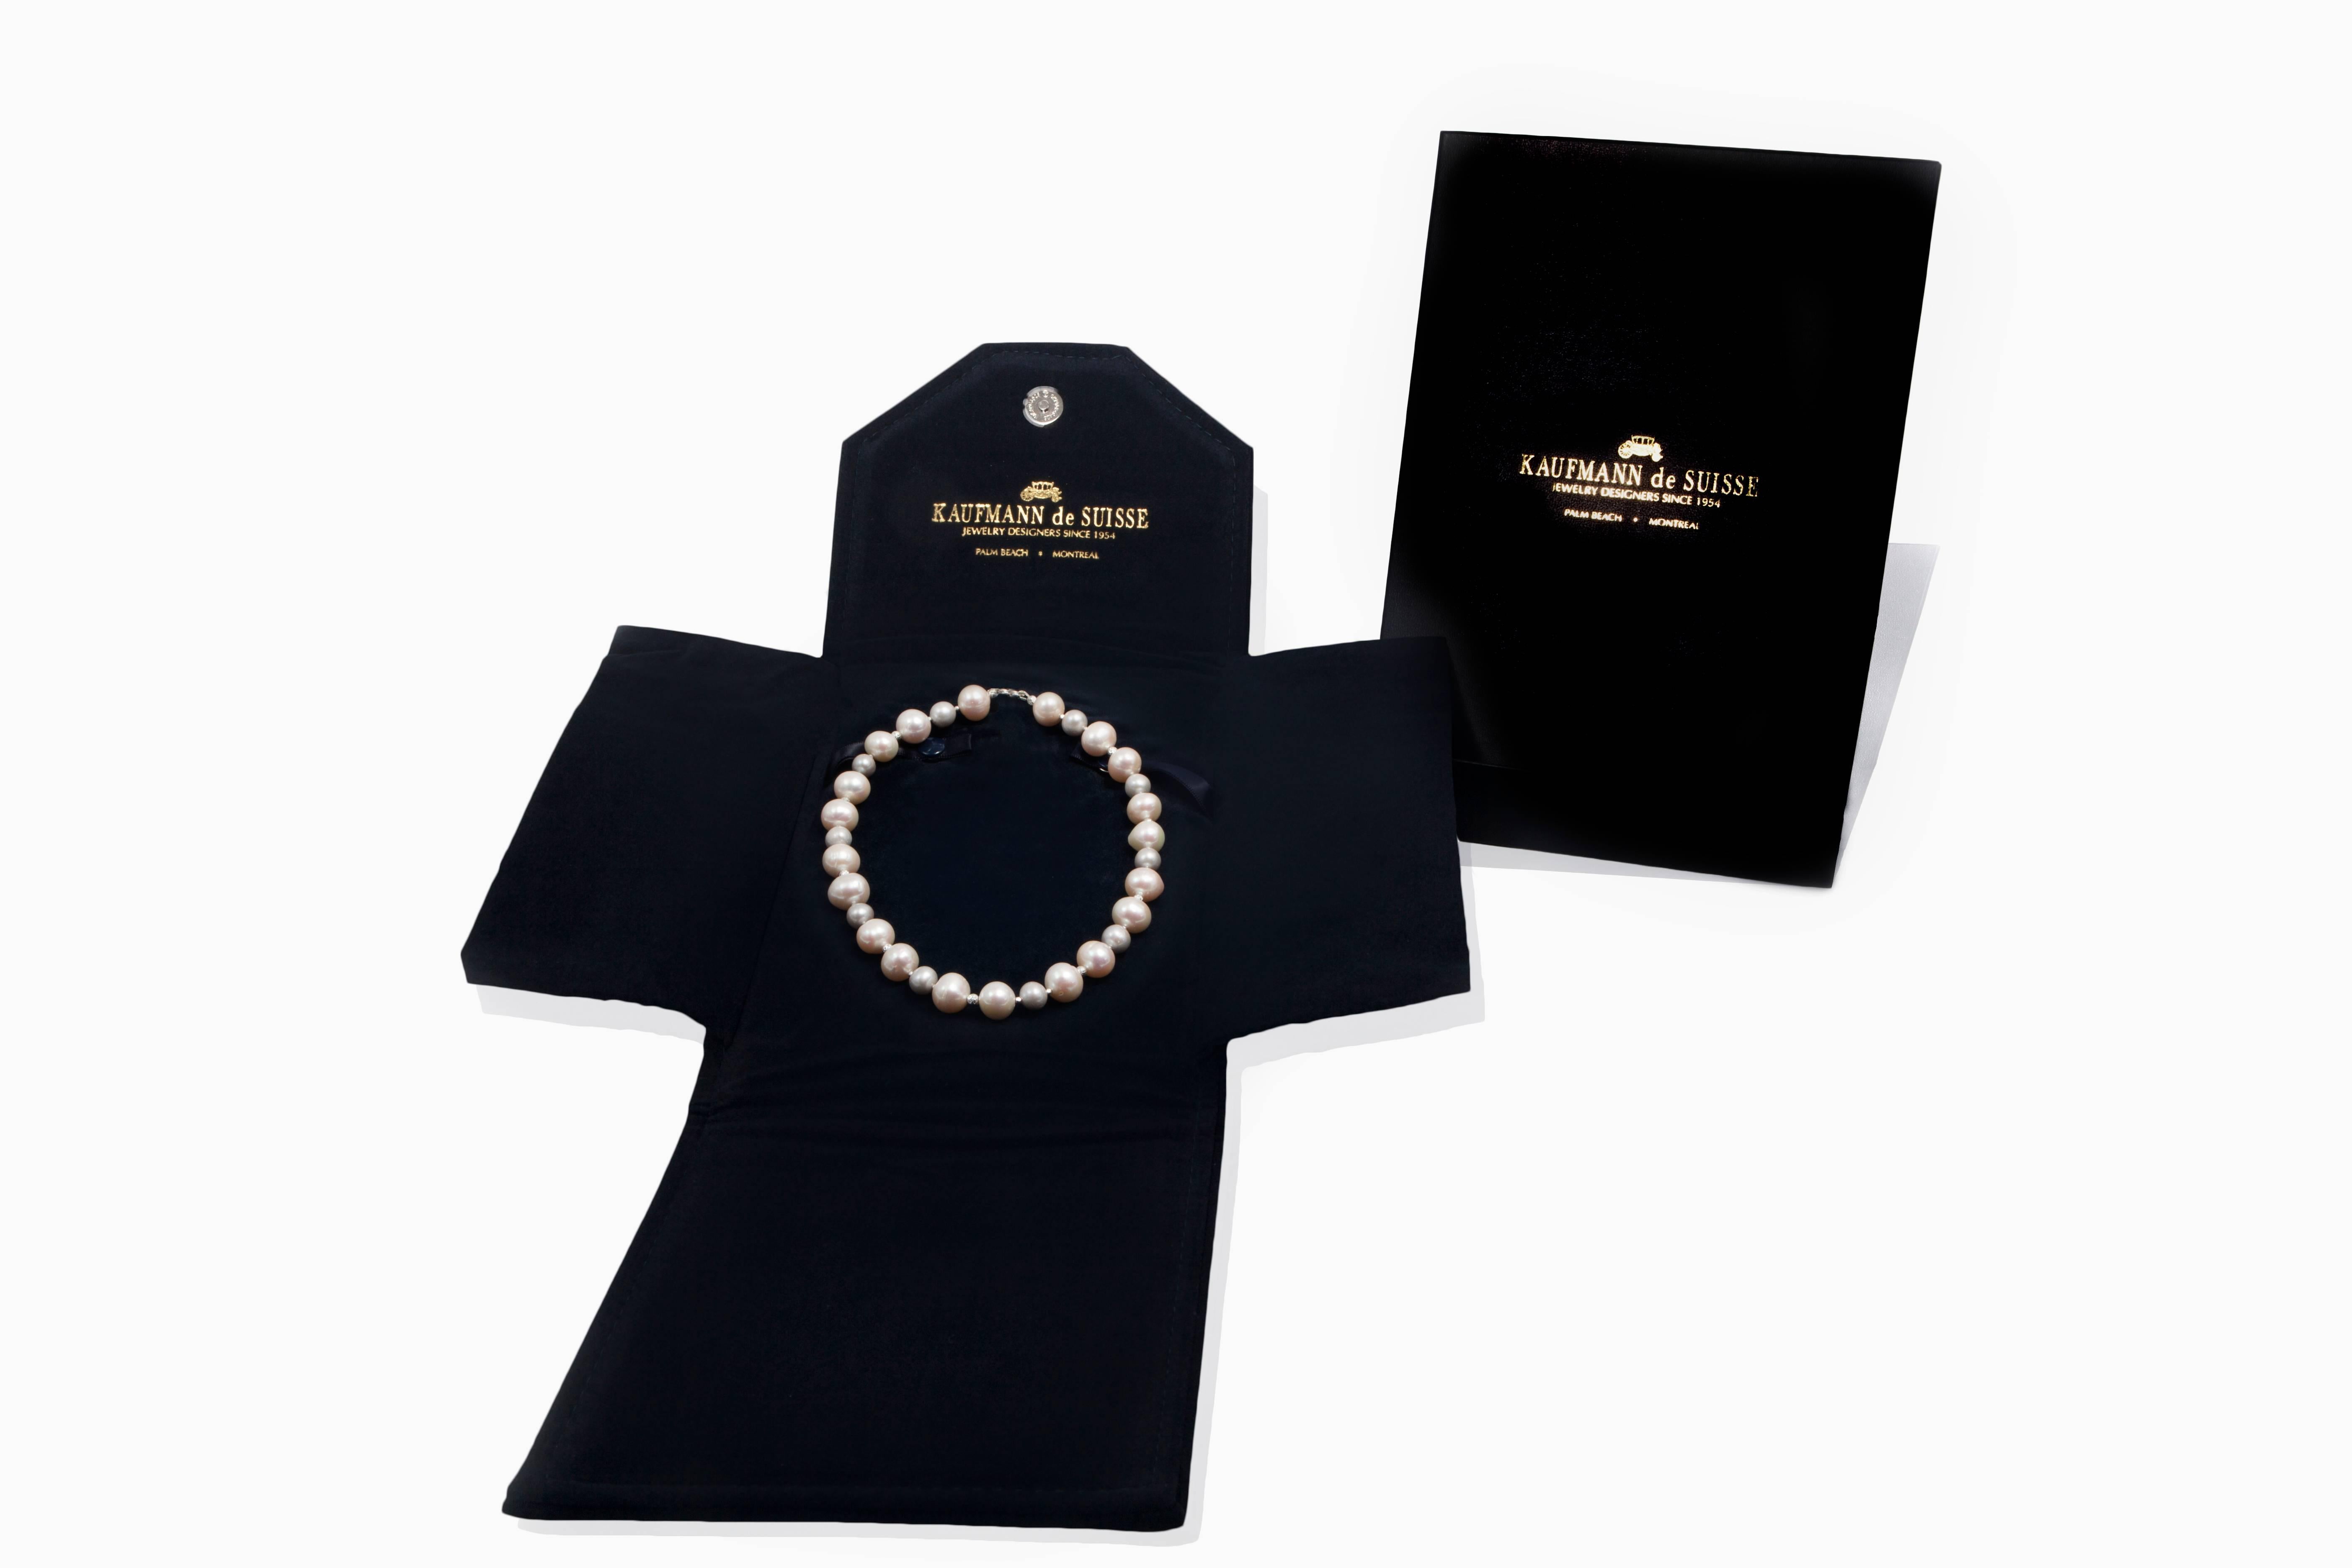 Features 20 Hand Picked Freshwater Grey Pearls Measuring 8.5-9mm Each and 20 White Pearls Measuring 12-13mm Each. Beautifully Spaced with Sterling Silver Diamond Cut Beads. Original Kaufmann de Suisse design. Handmade in Palm Beach, United States.